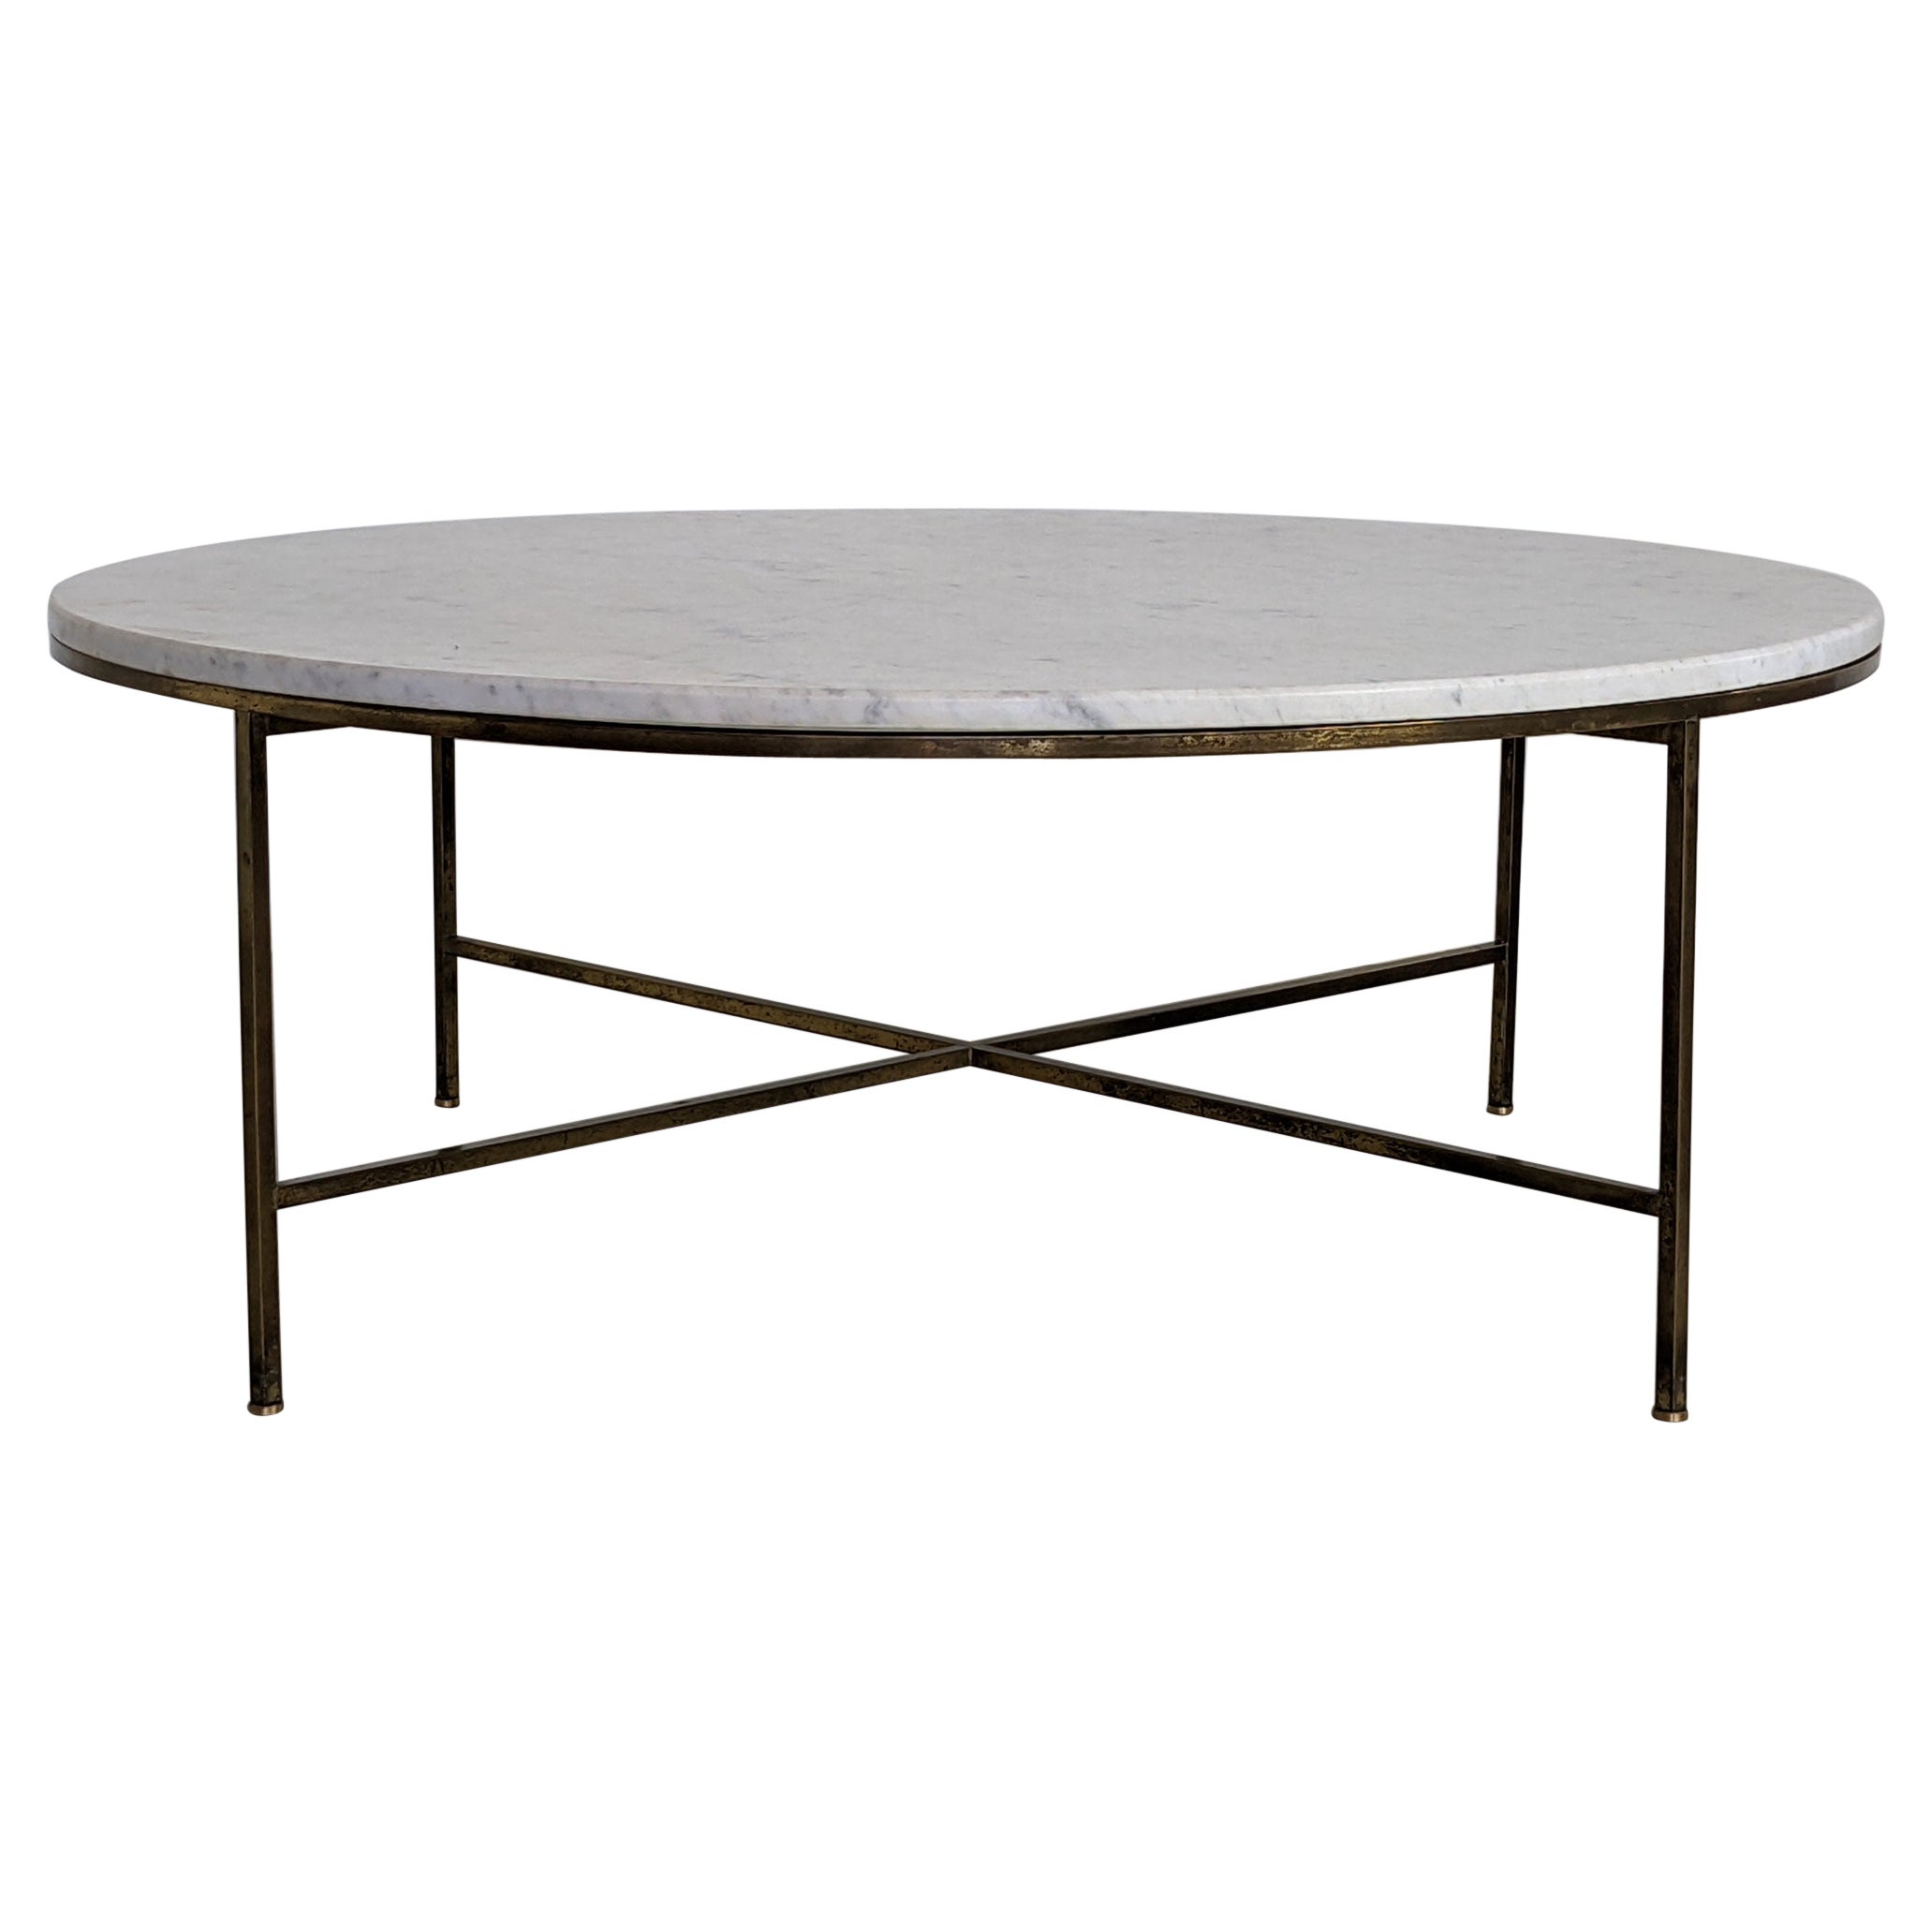 Paul McCobb & Calvin Furniture Round Coffee Table in Marble & Brass, 1950s